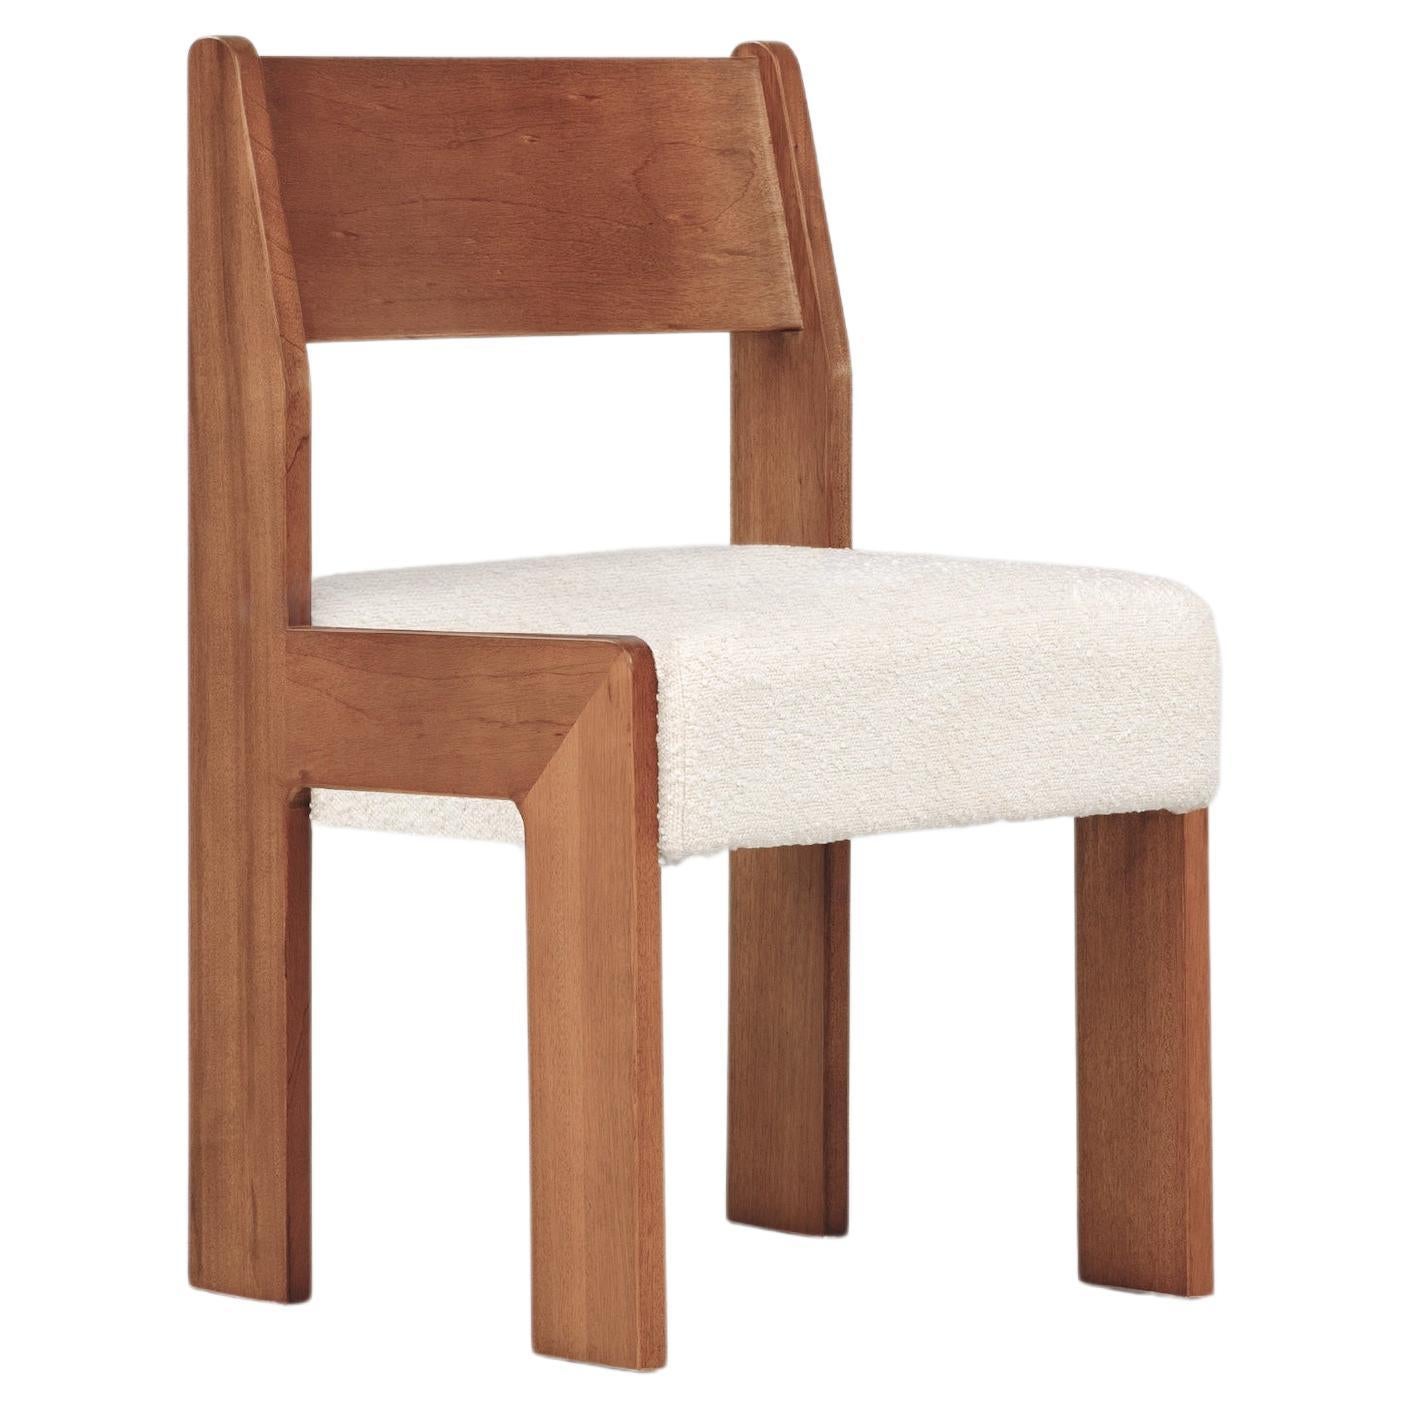 Reka Side Chair, Minimalist Velvet and Wood Dining Chair in Amber/Cream Bouclé